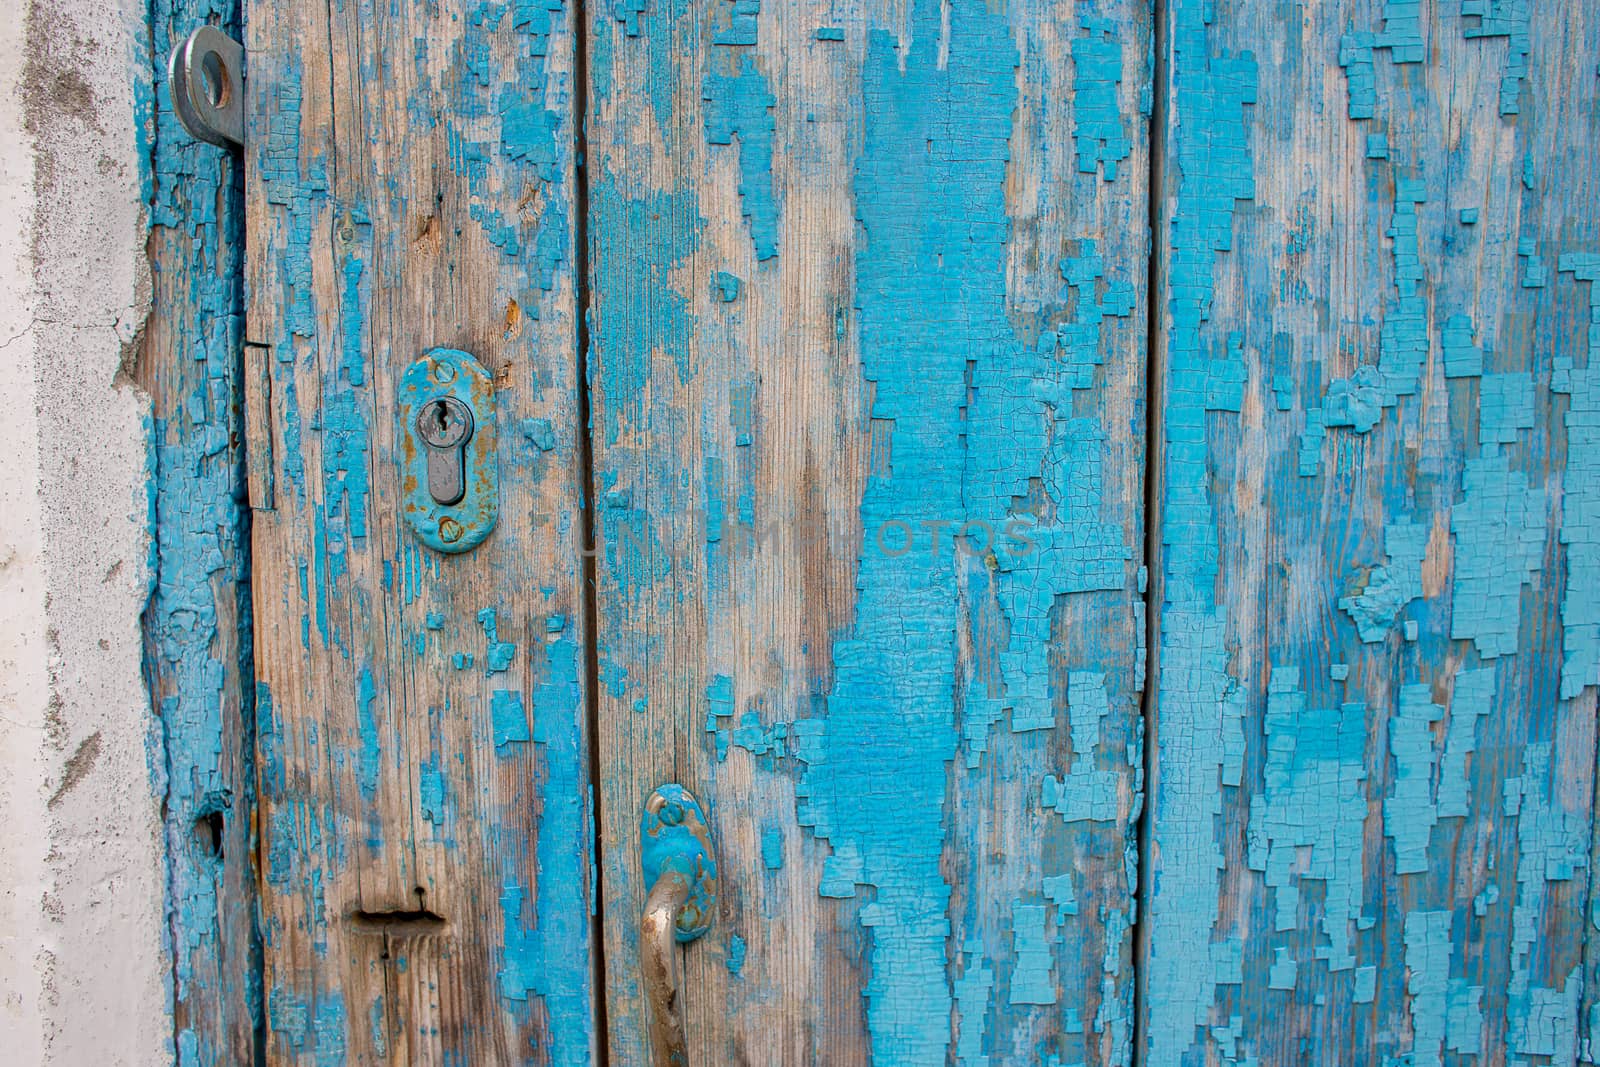 Background from an old wooden door painted in blue. Texture of peeling paint on the boards